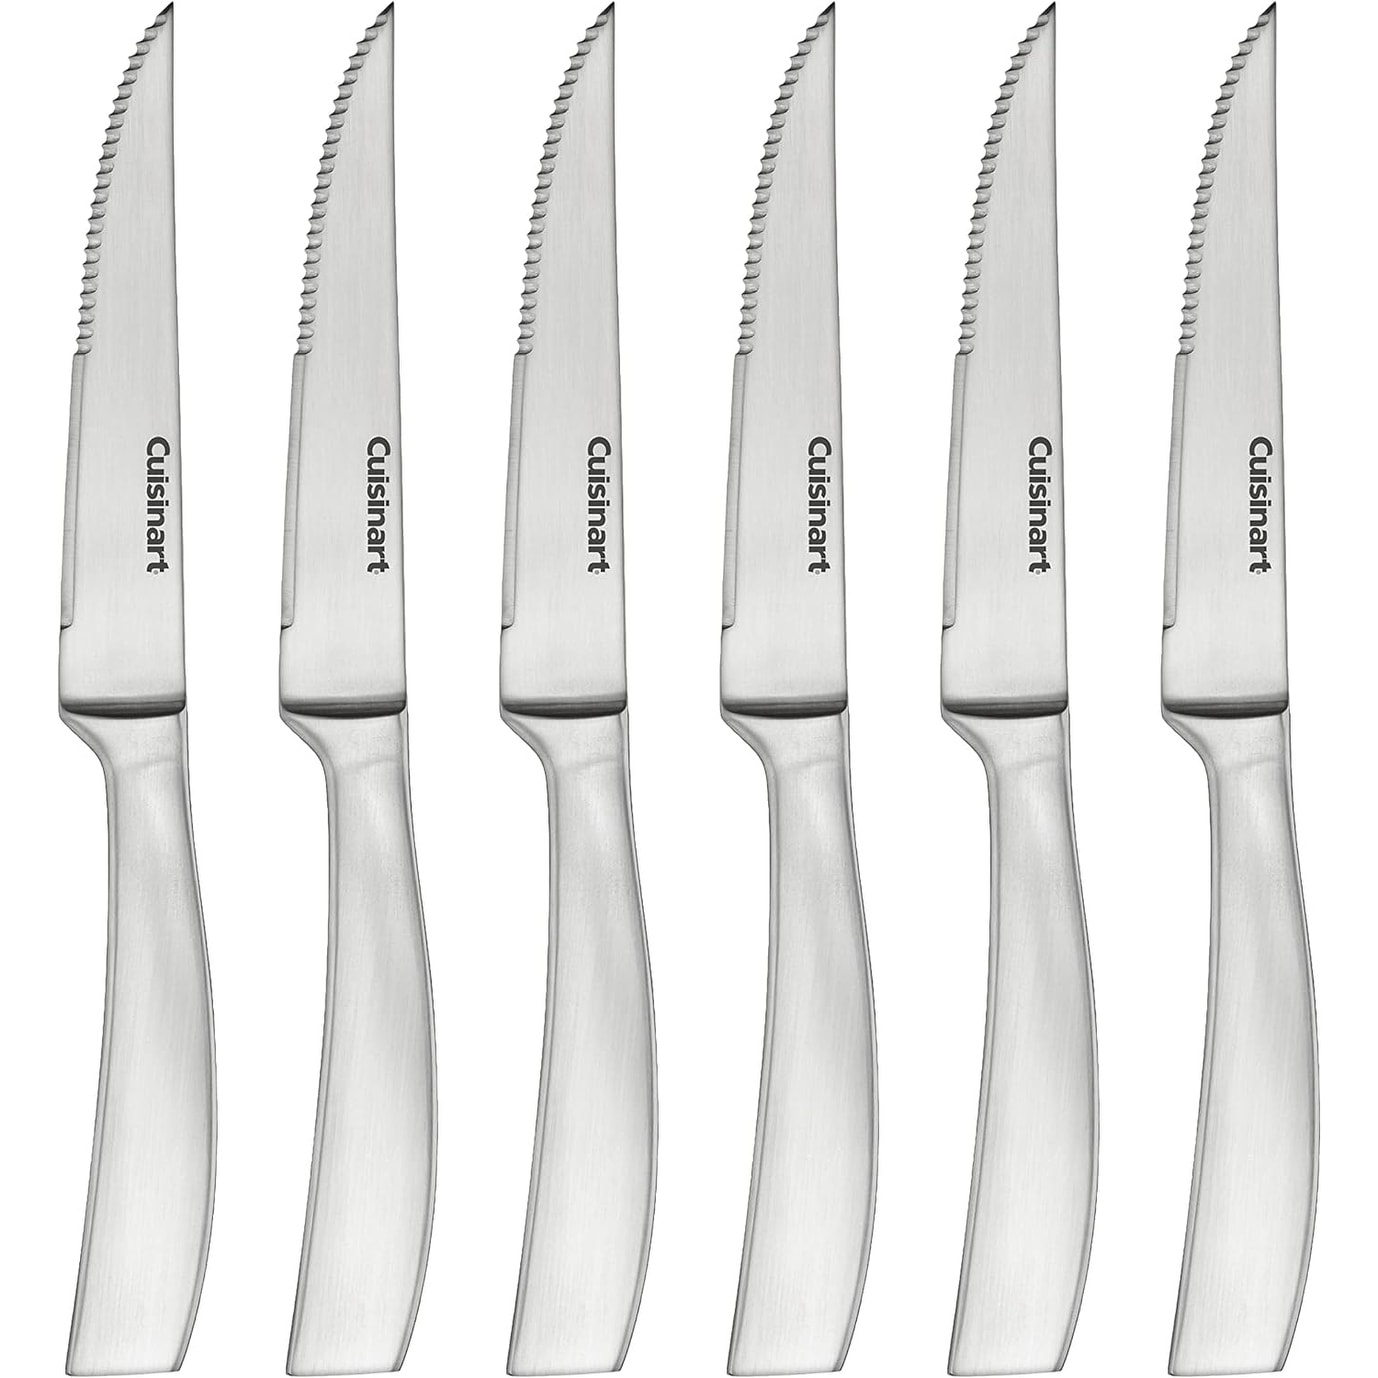 https://ak1.ostkcdn.com/images/products/is/images/direct/b1efaa944961dd068a94197e99247653bef5841f/Cuisinart-Forged-Stainless-Steel-Premium-Steak-Knives%2C-6--Piece-Set.jpg